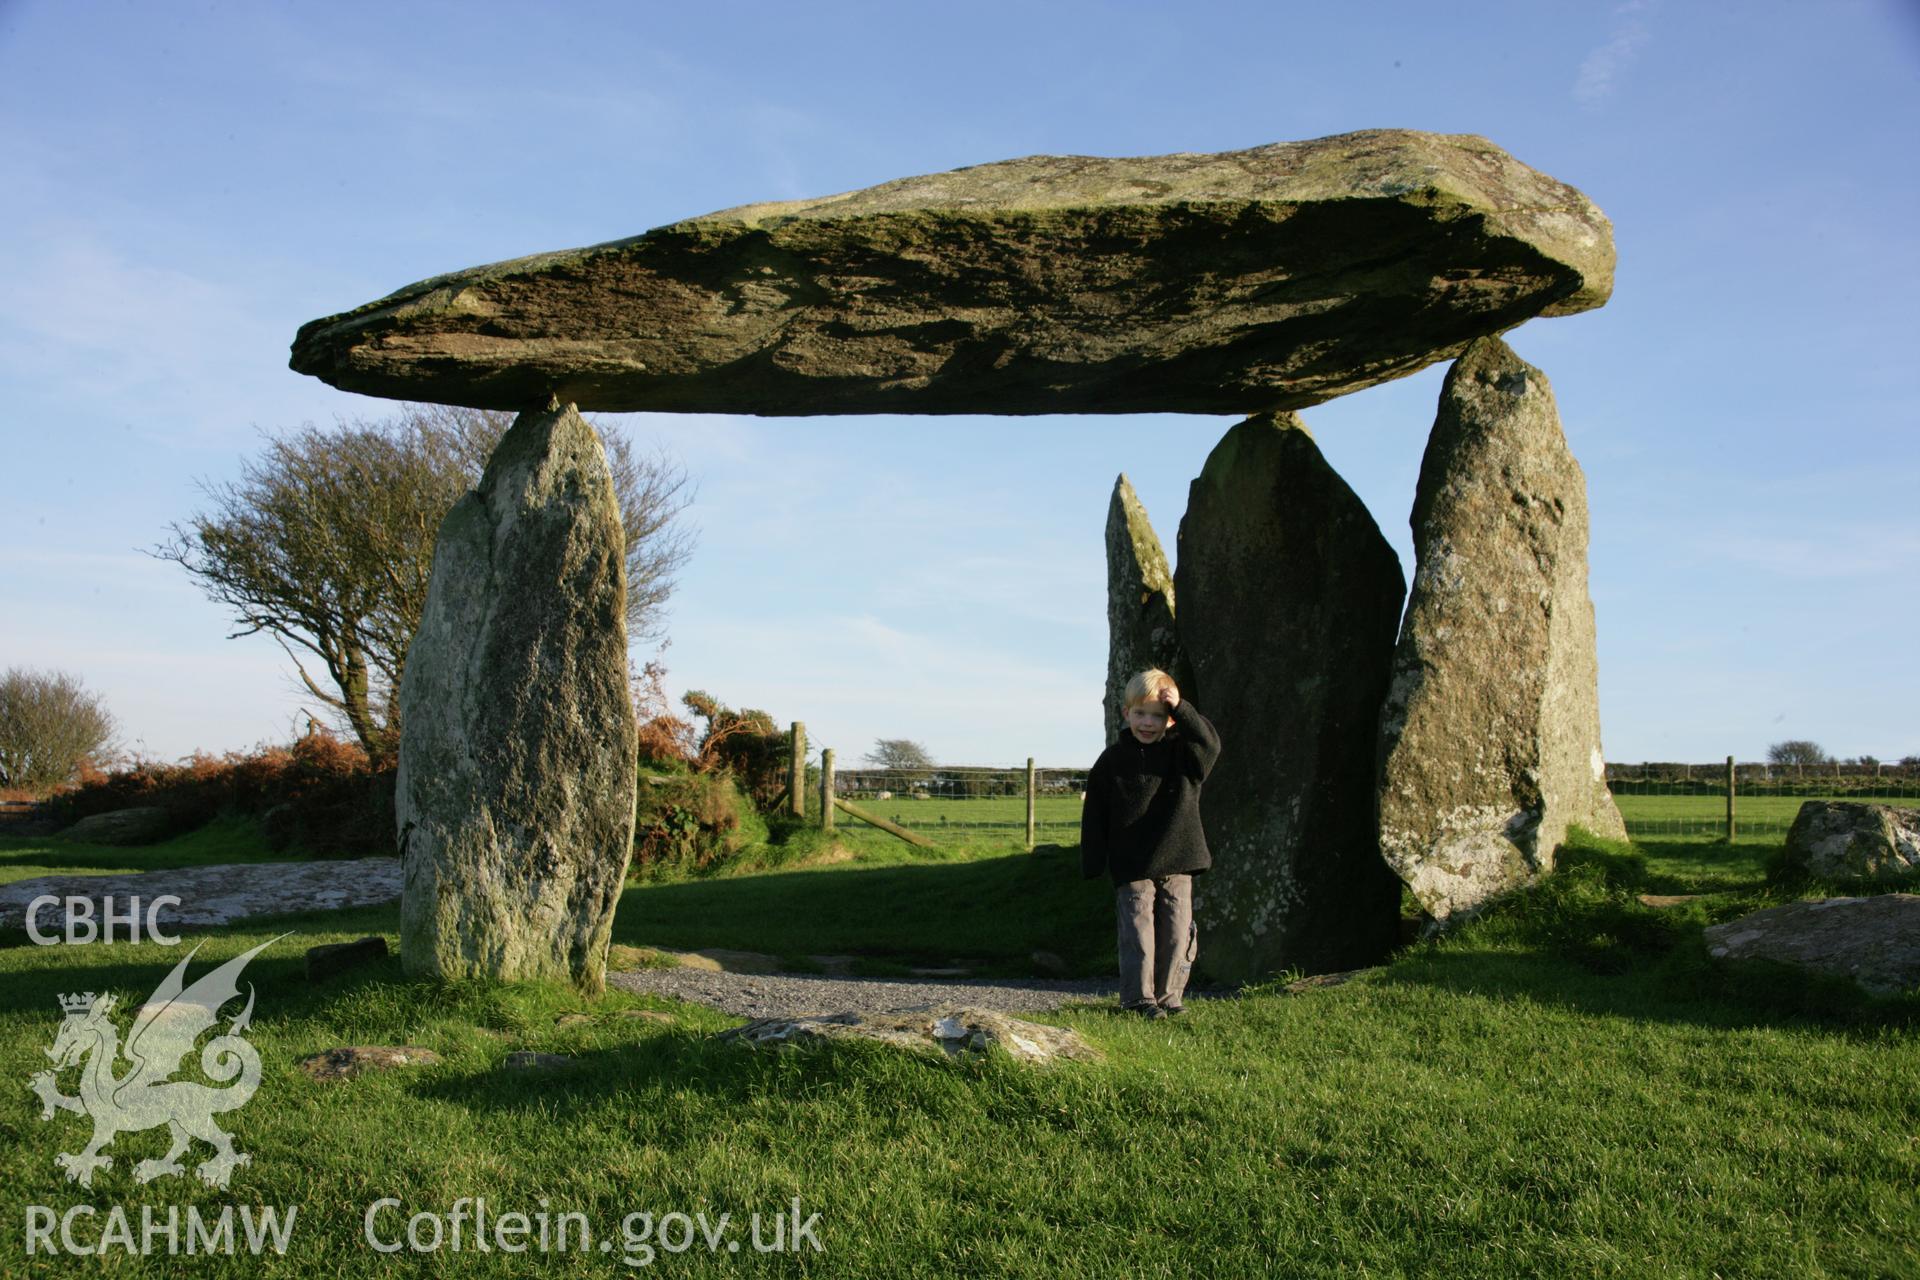 Pentre Ifan chambered tomb at sunset; view of the chamber from the west with child.